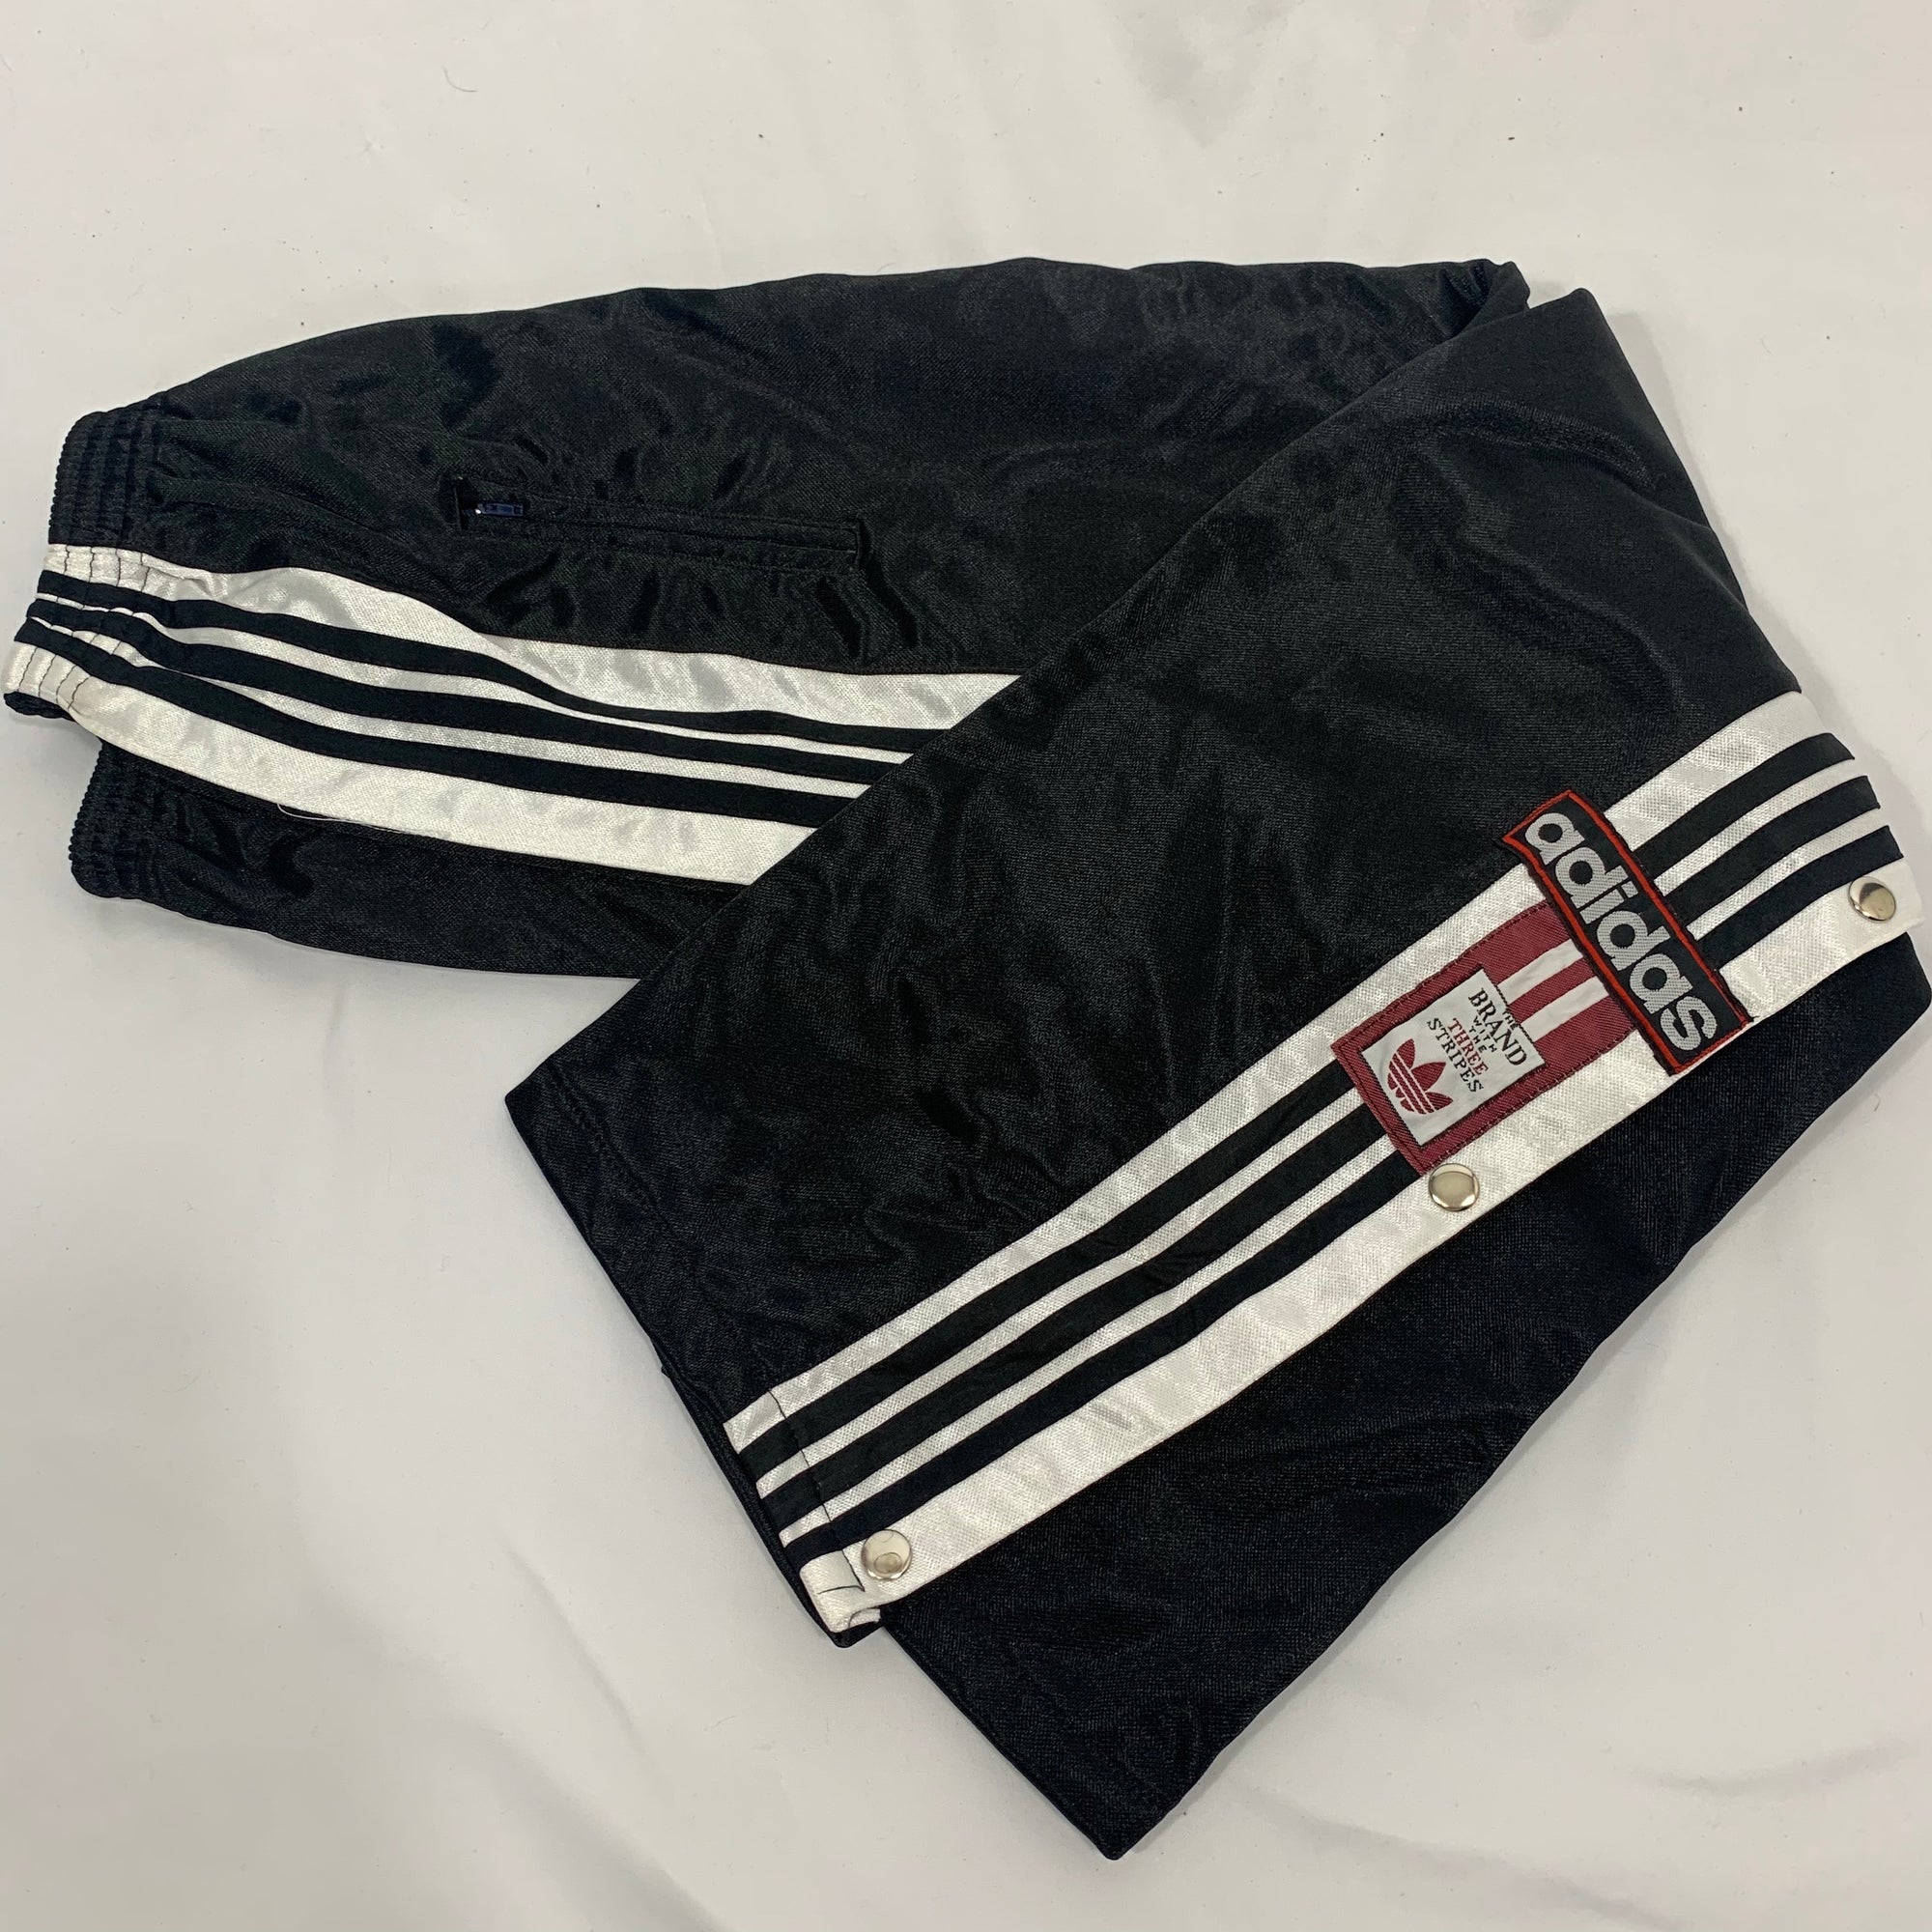 Vintage Adidas Popper Track Pants in Black - Small